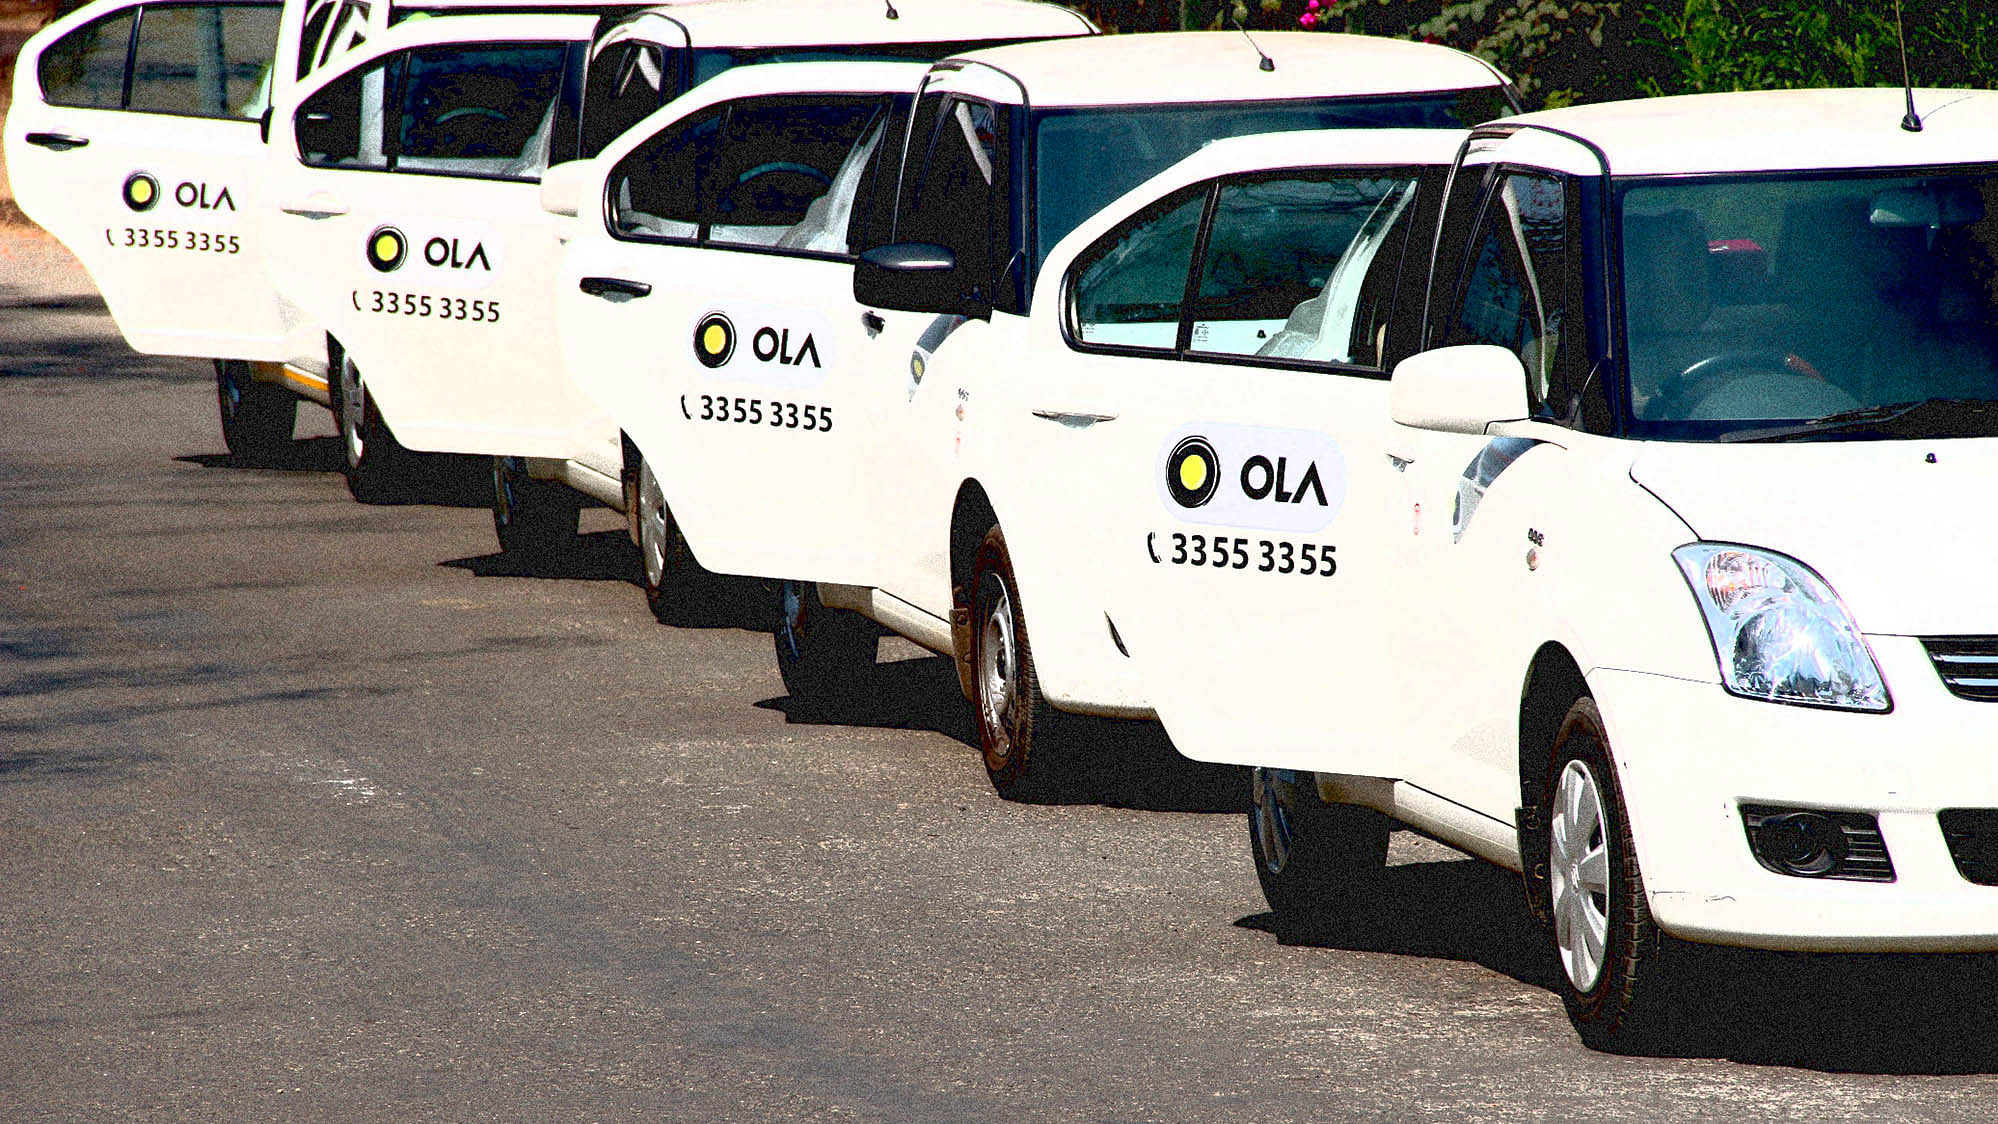 Ola has announced the launch of ‘Ola Emergency’ on its app to enable essential medical trips amid coronavirus outbreak.